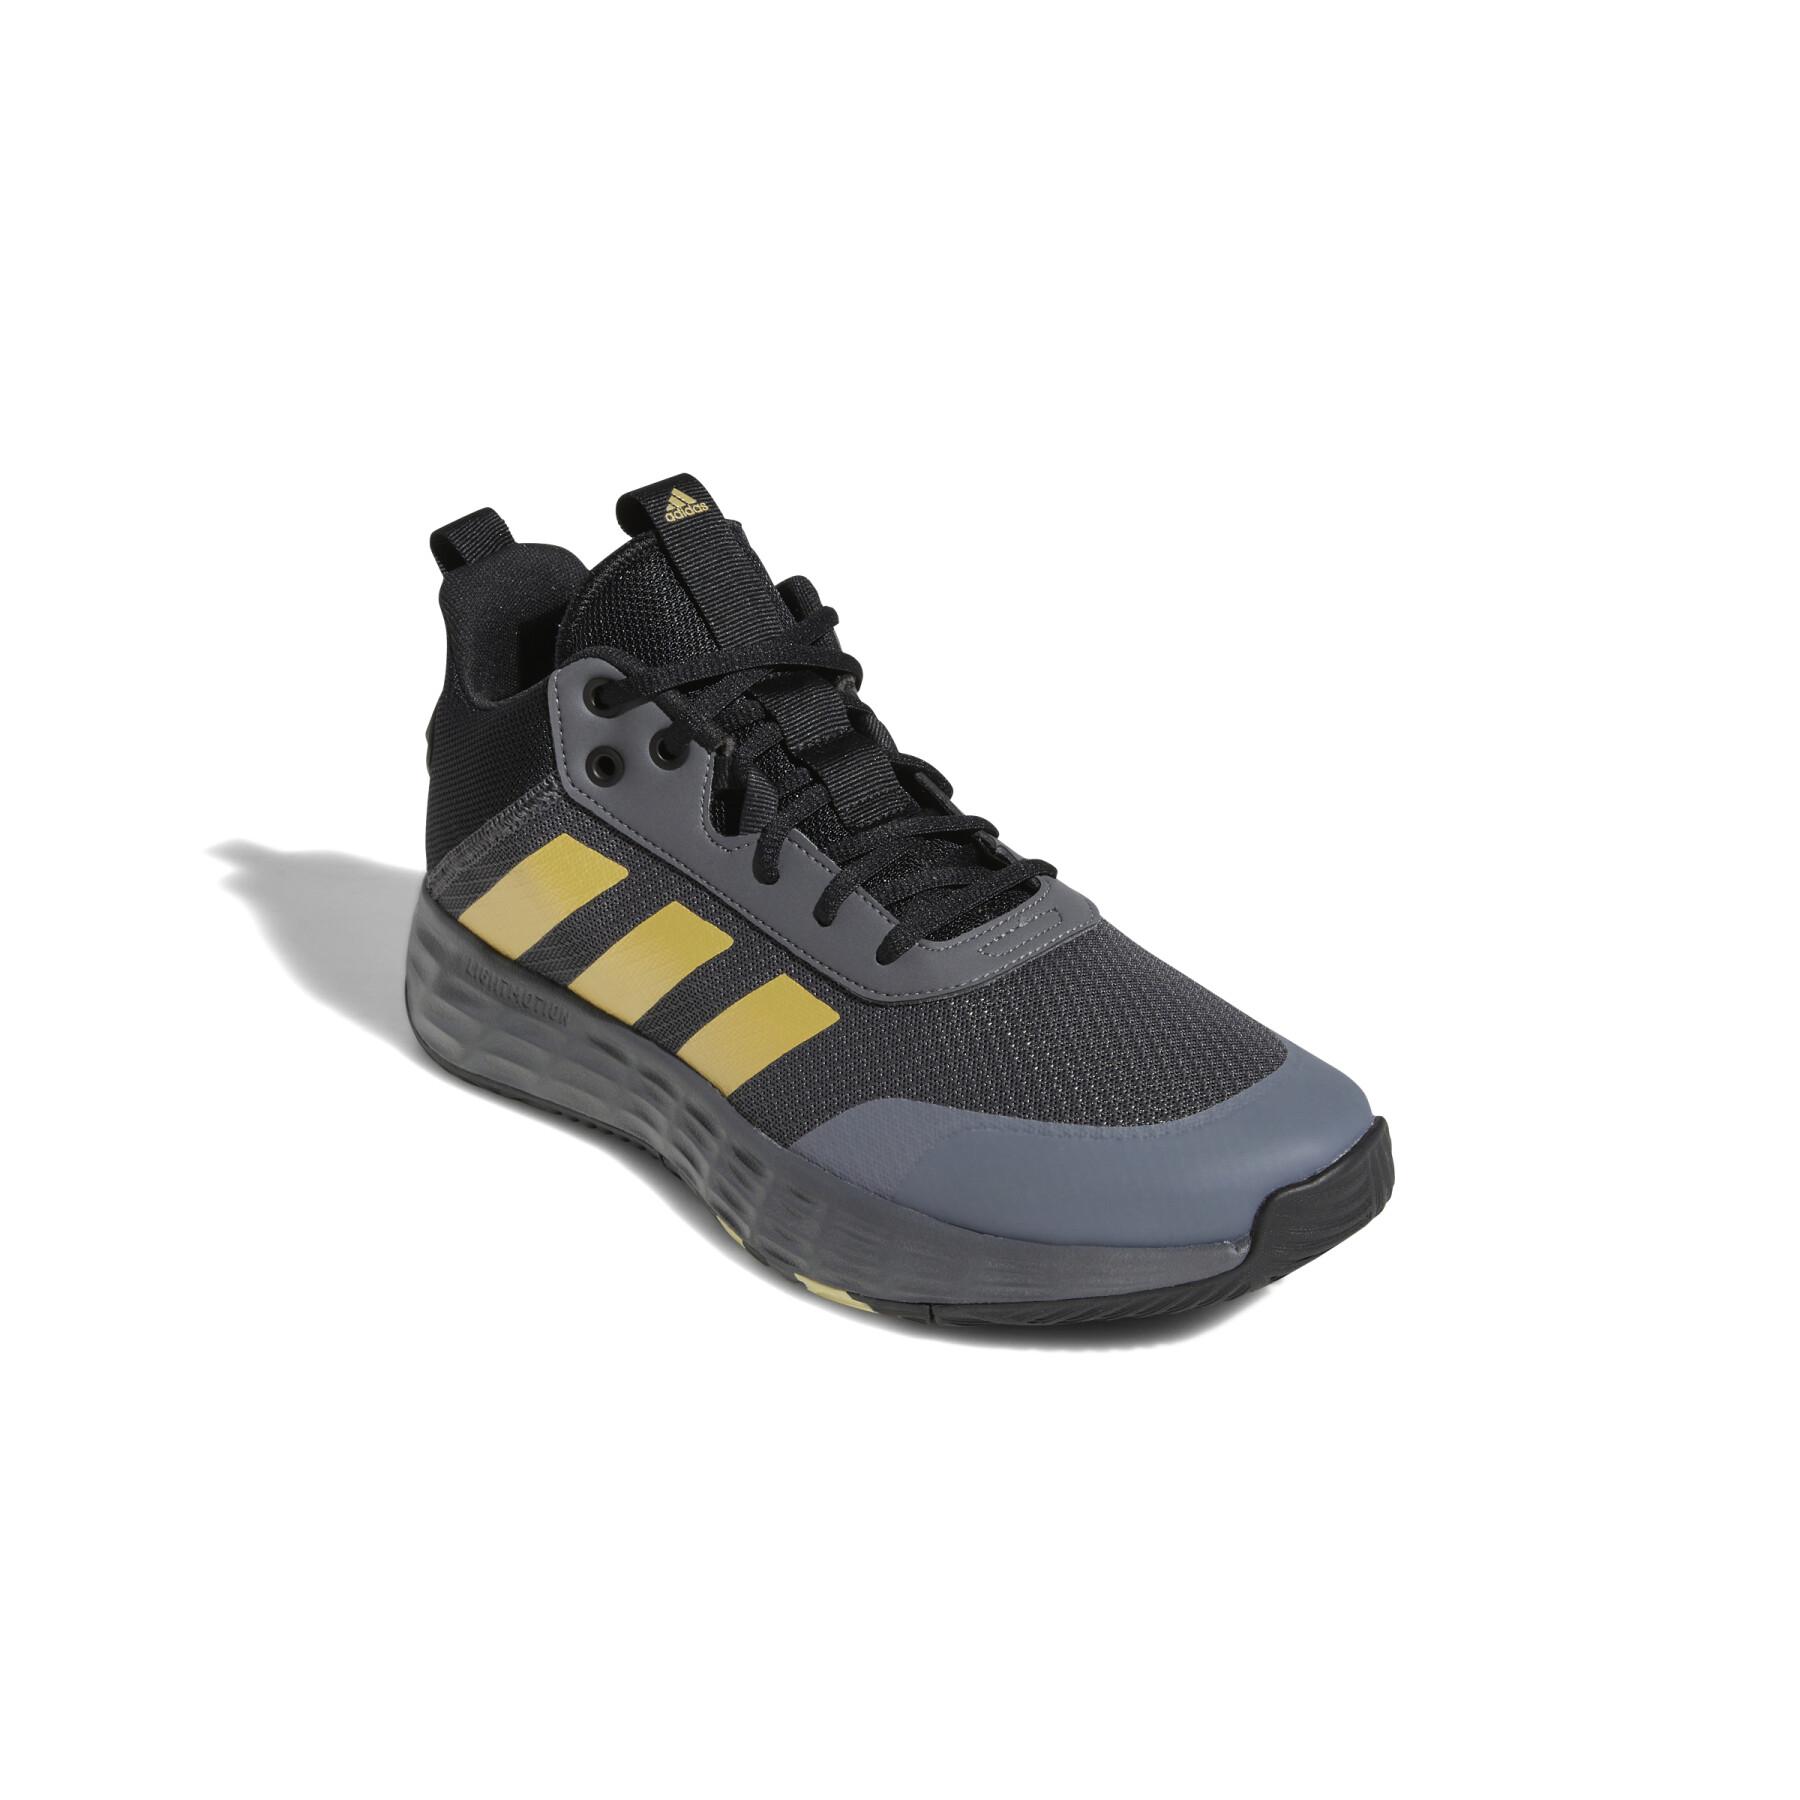 Indoor shoes Adidas Ownthegame